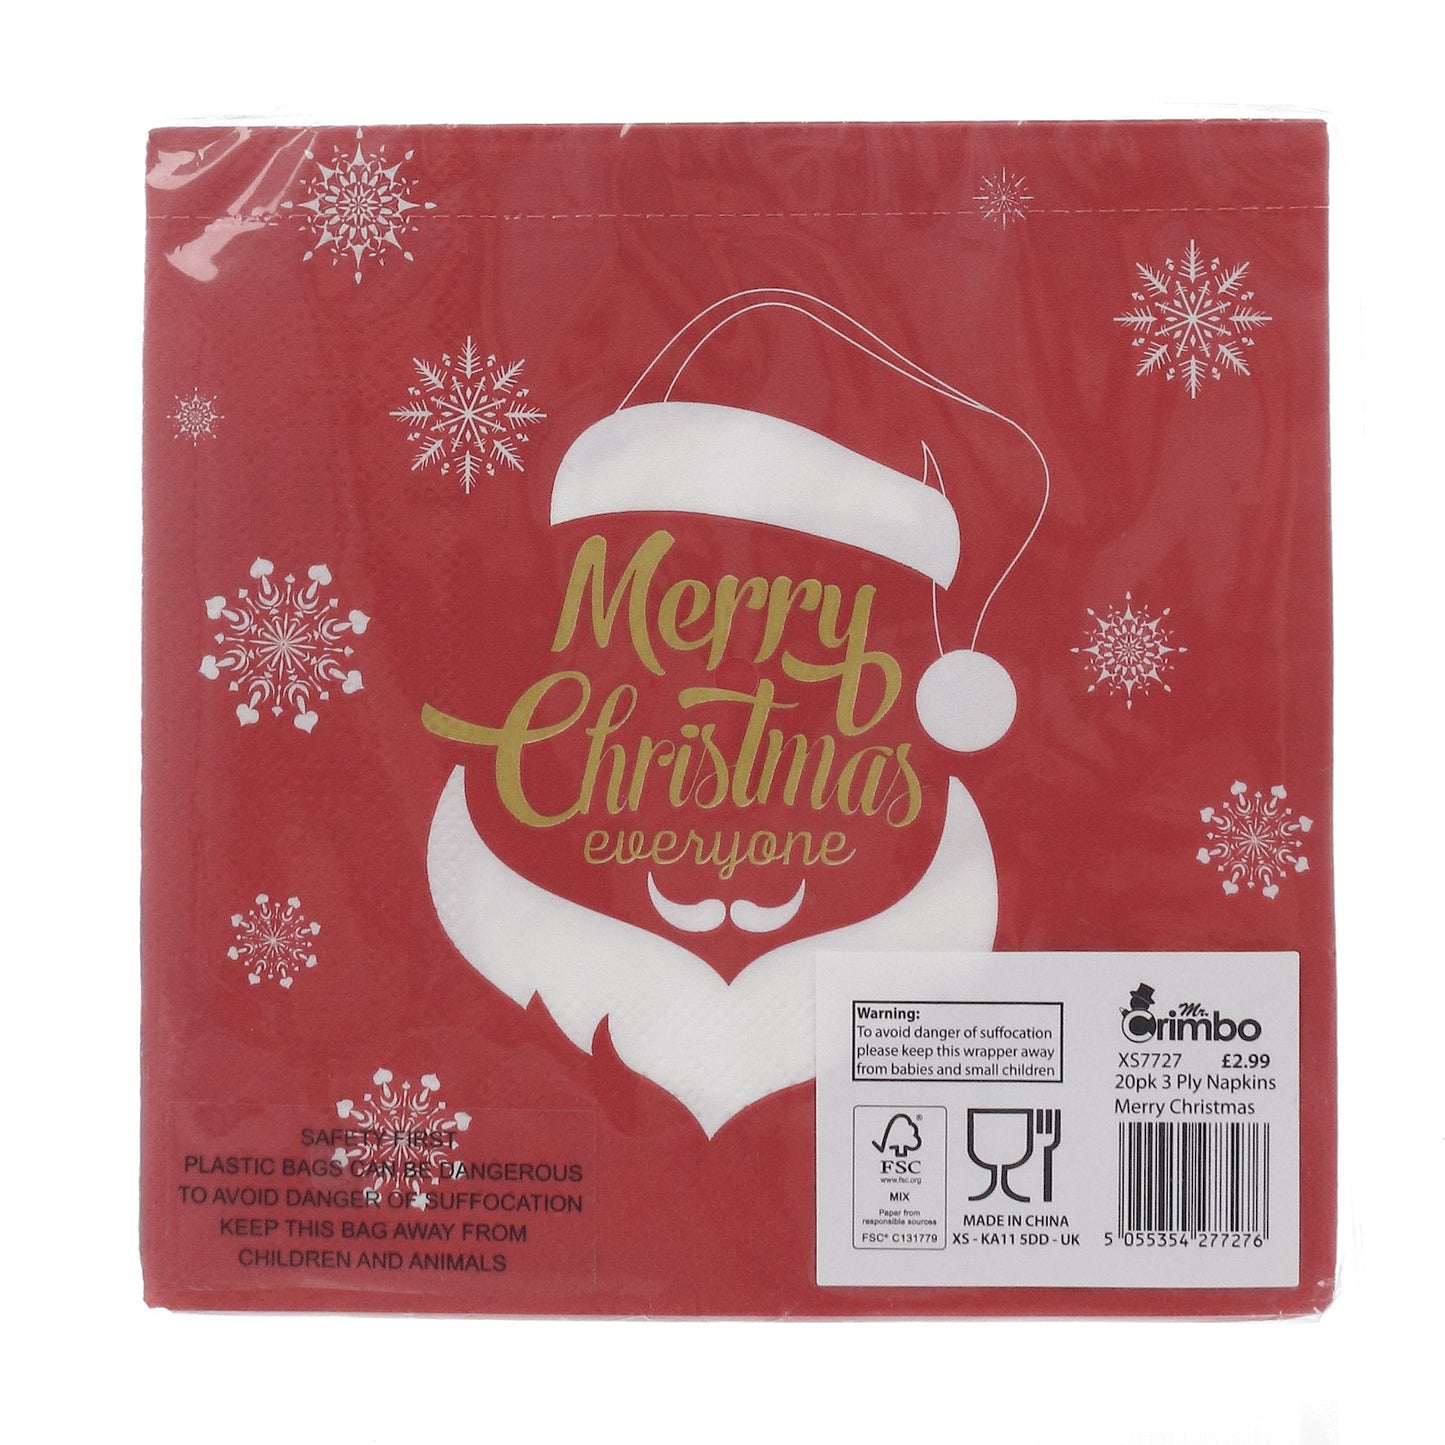 20 pack of napkins featuring merry christmas slogan in cellophane packaging